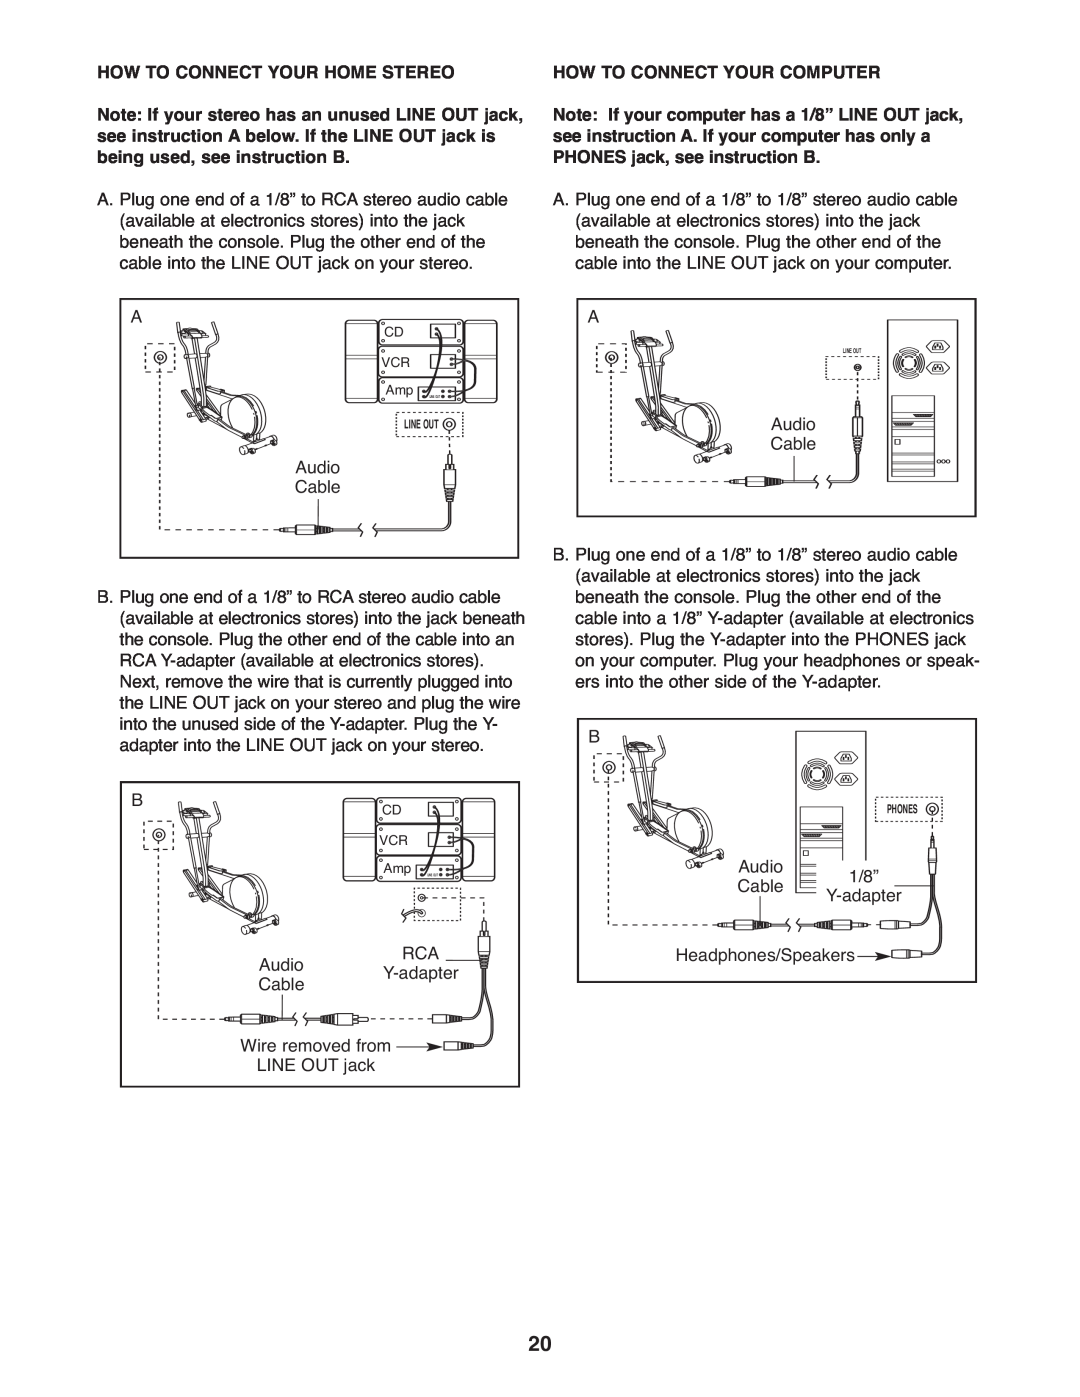 NordicTrack 30510.1 user manual How To Connect Your Home Stereo, How To Connect Your Computer, Line Out 